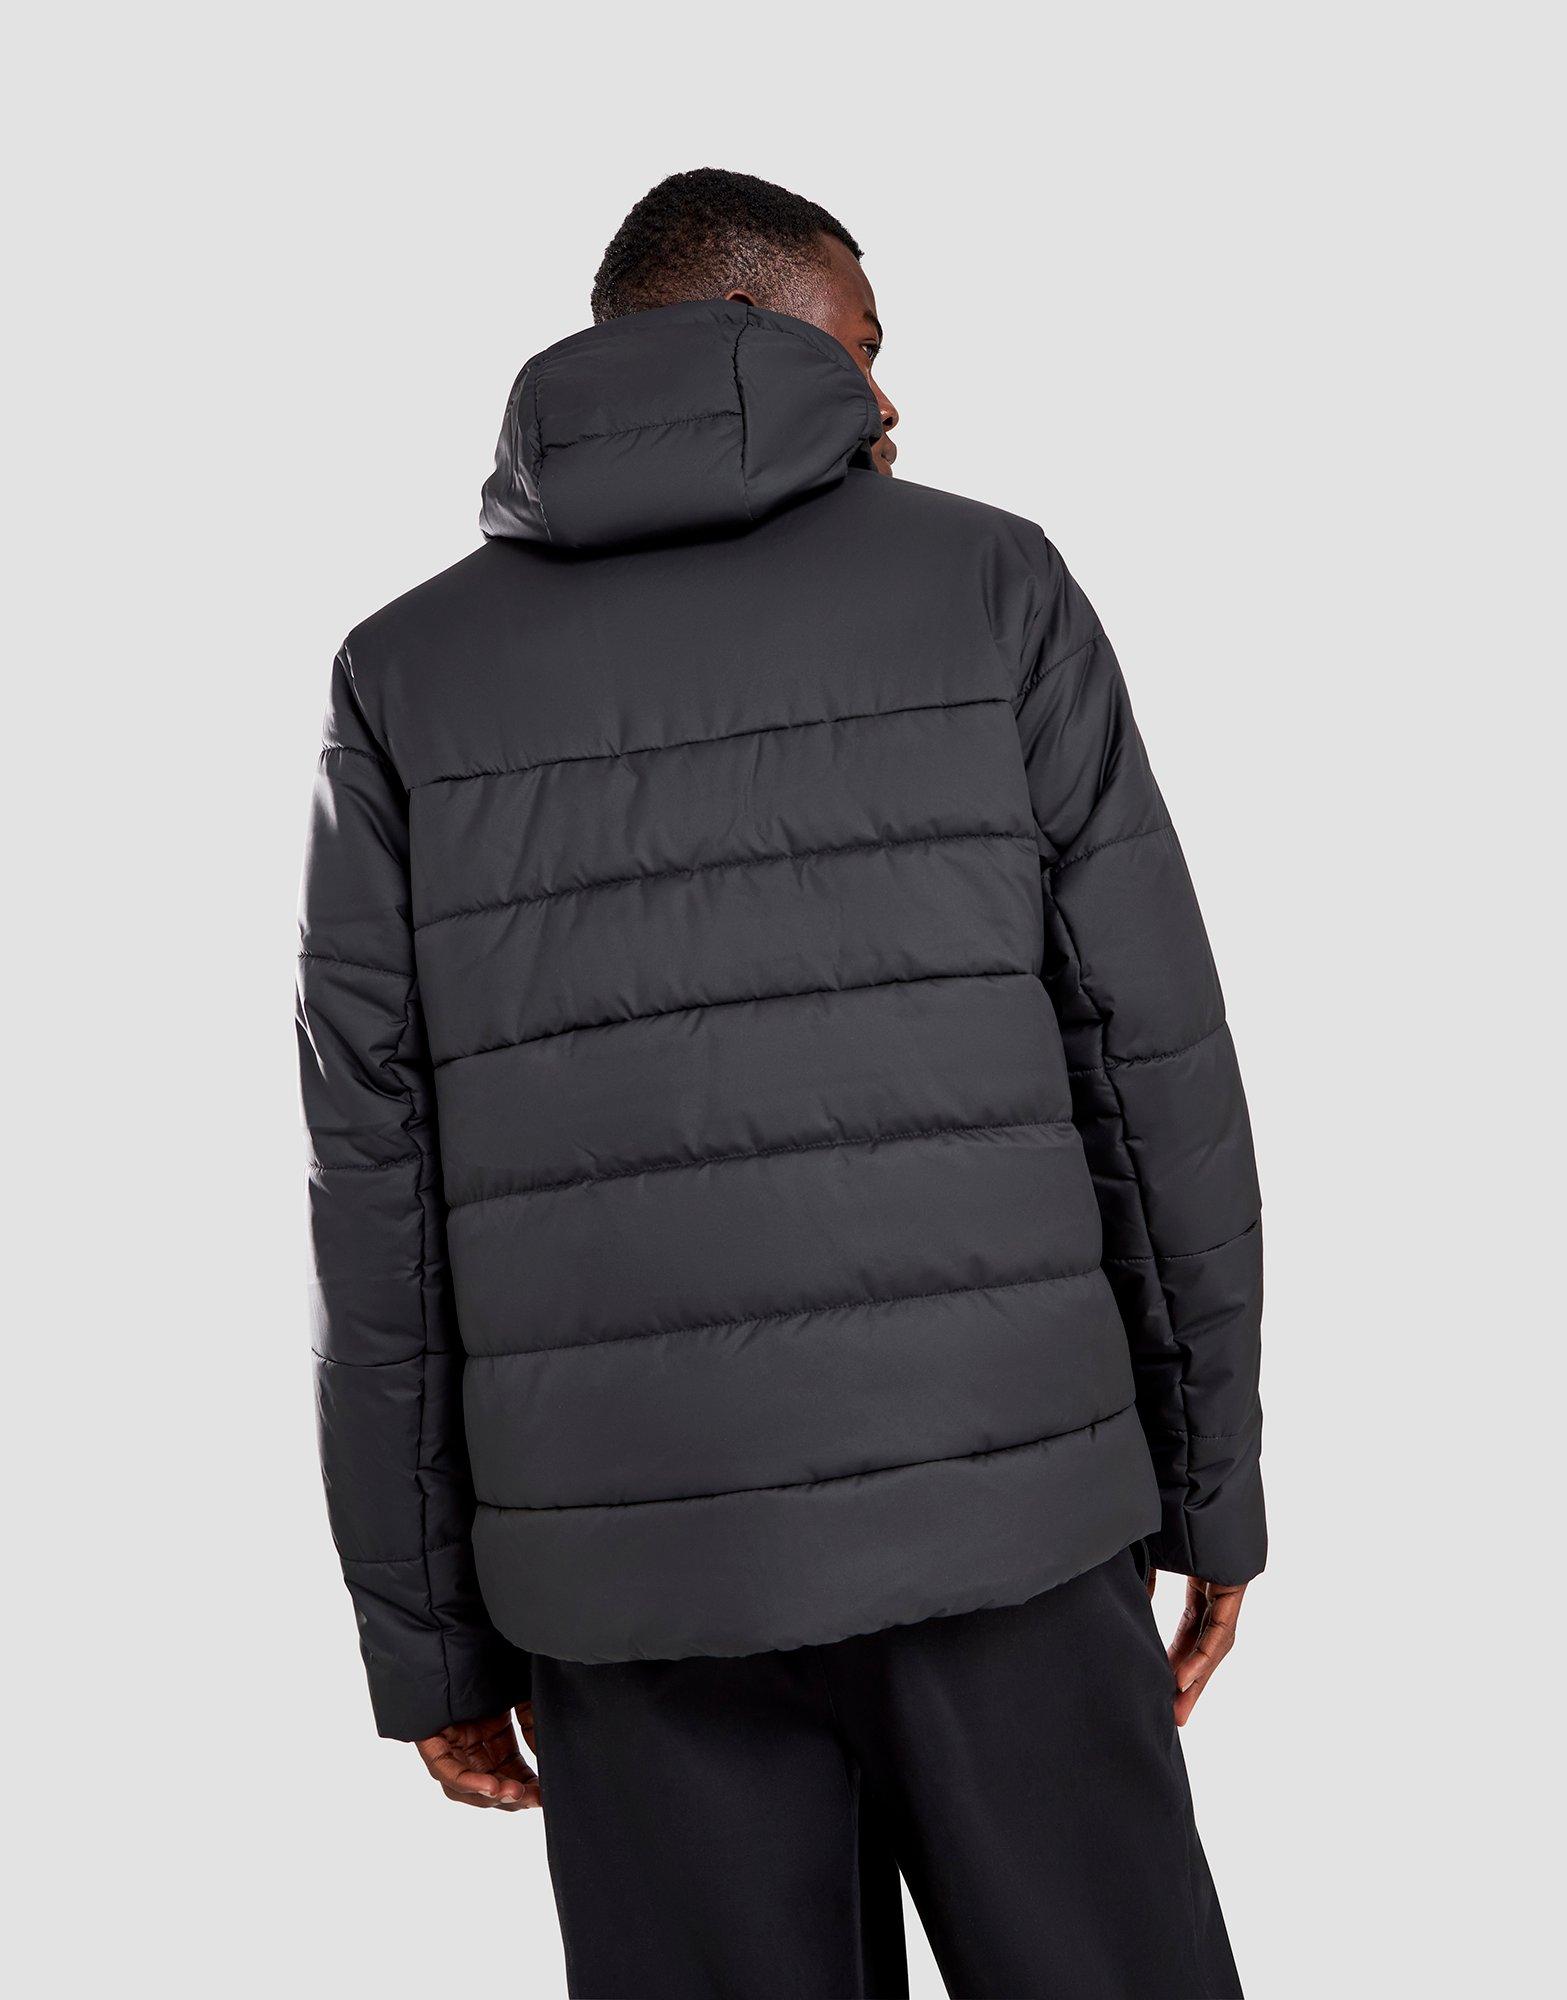 Nike classic padded tape jacket with hood in black - ShopStyle